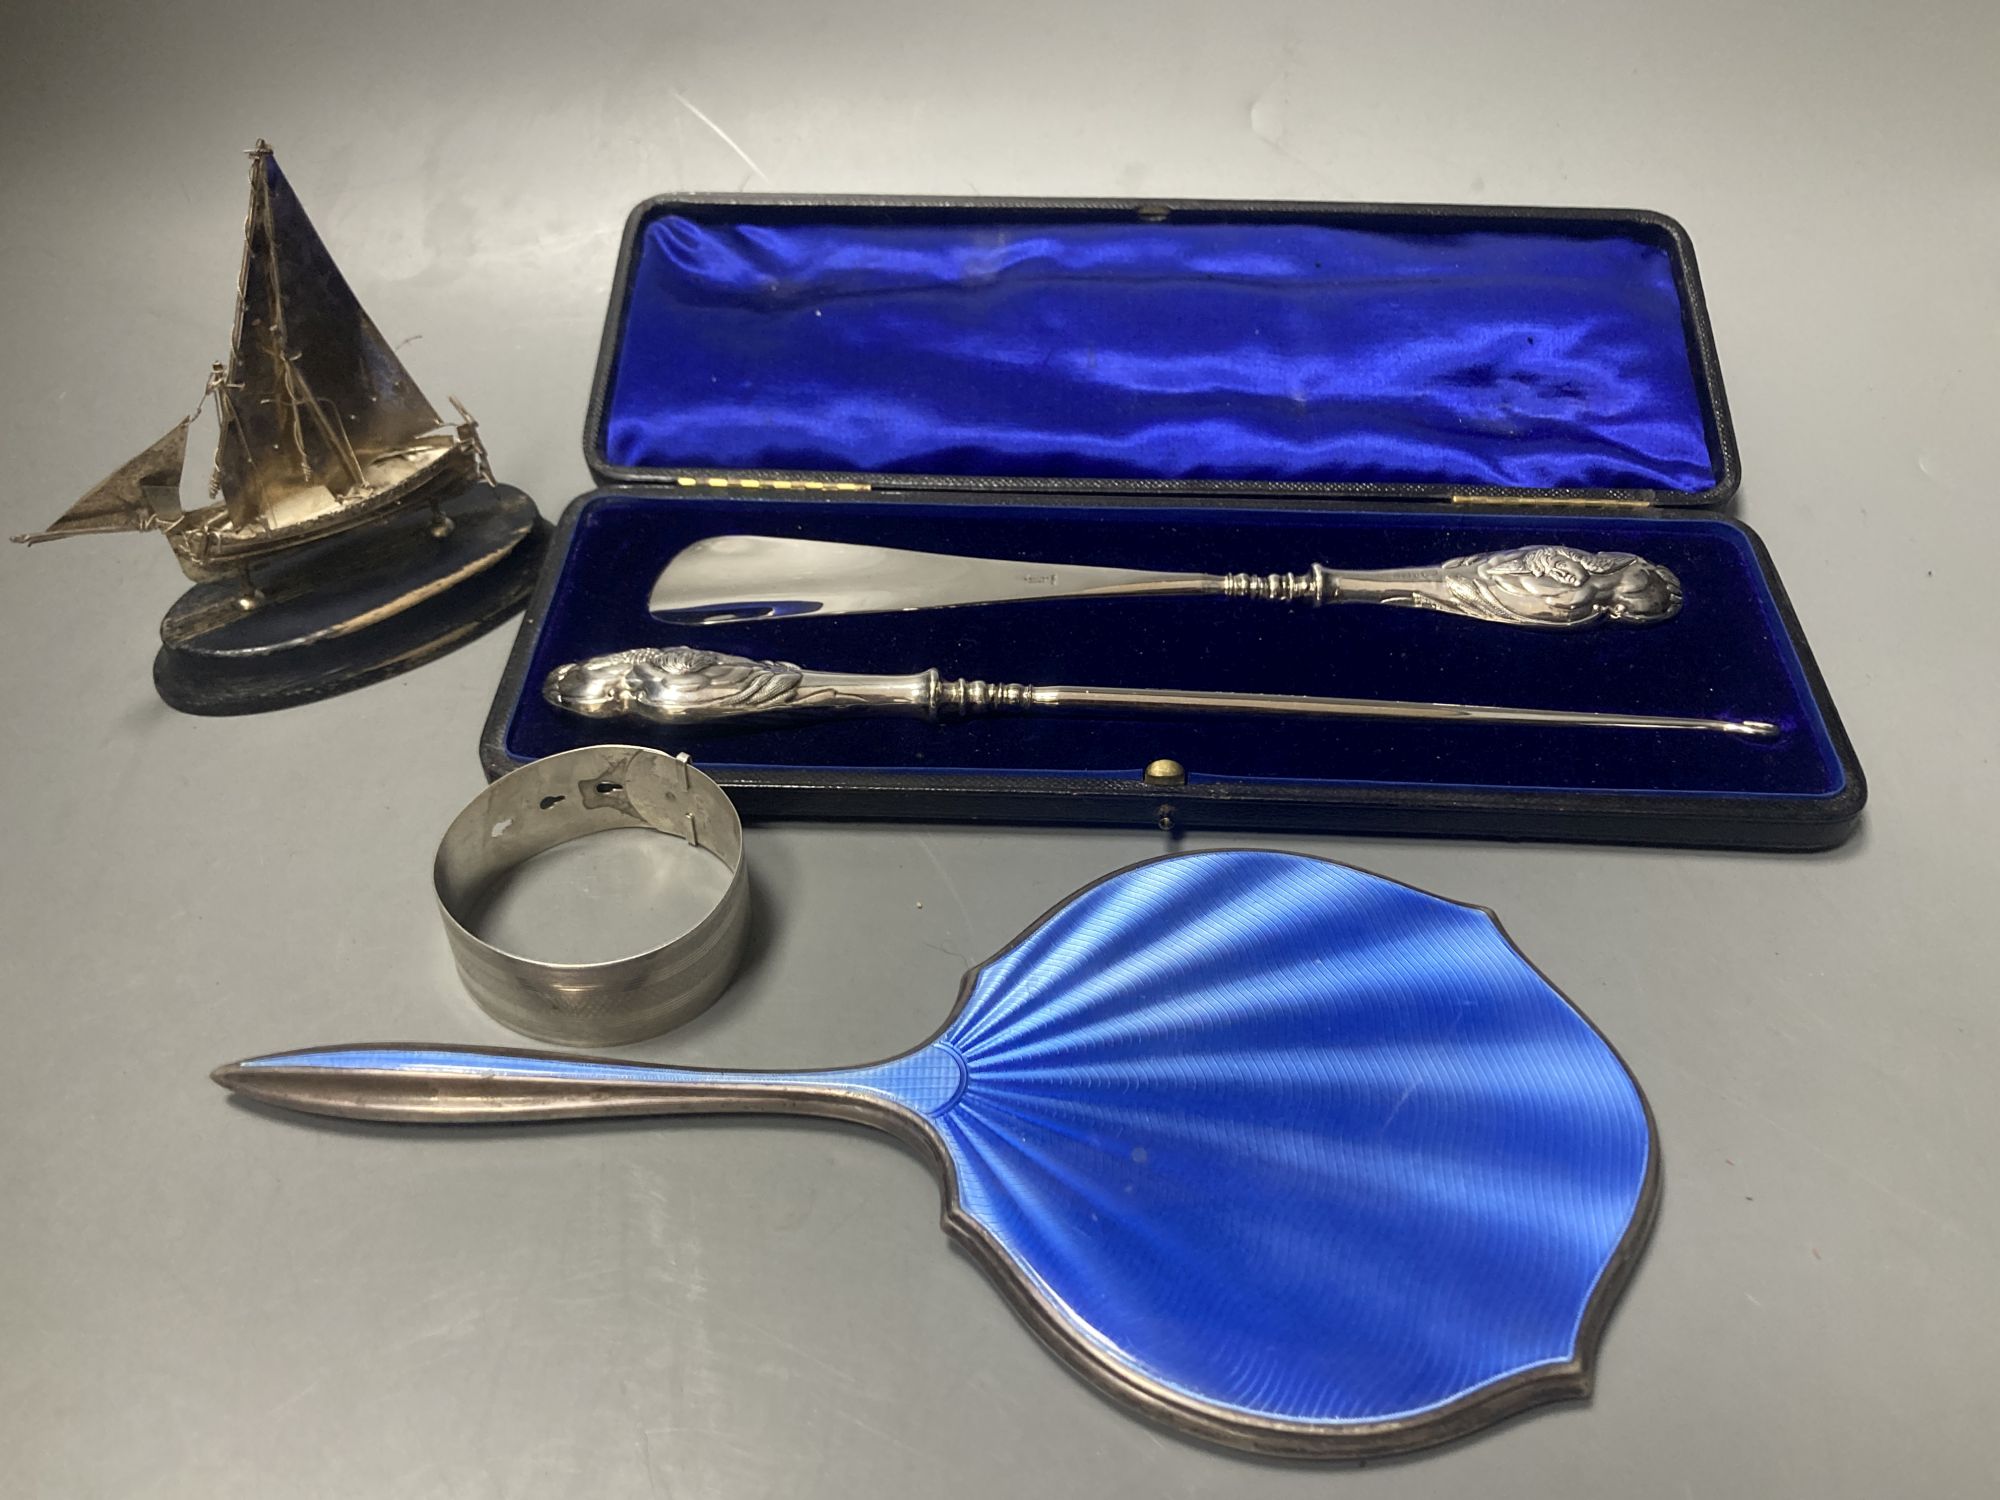 A cased silver handled button hook and shoe horn, a silver and enamel hand mirror, a silver bangle and small silver model ship